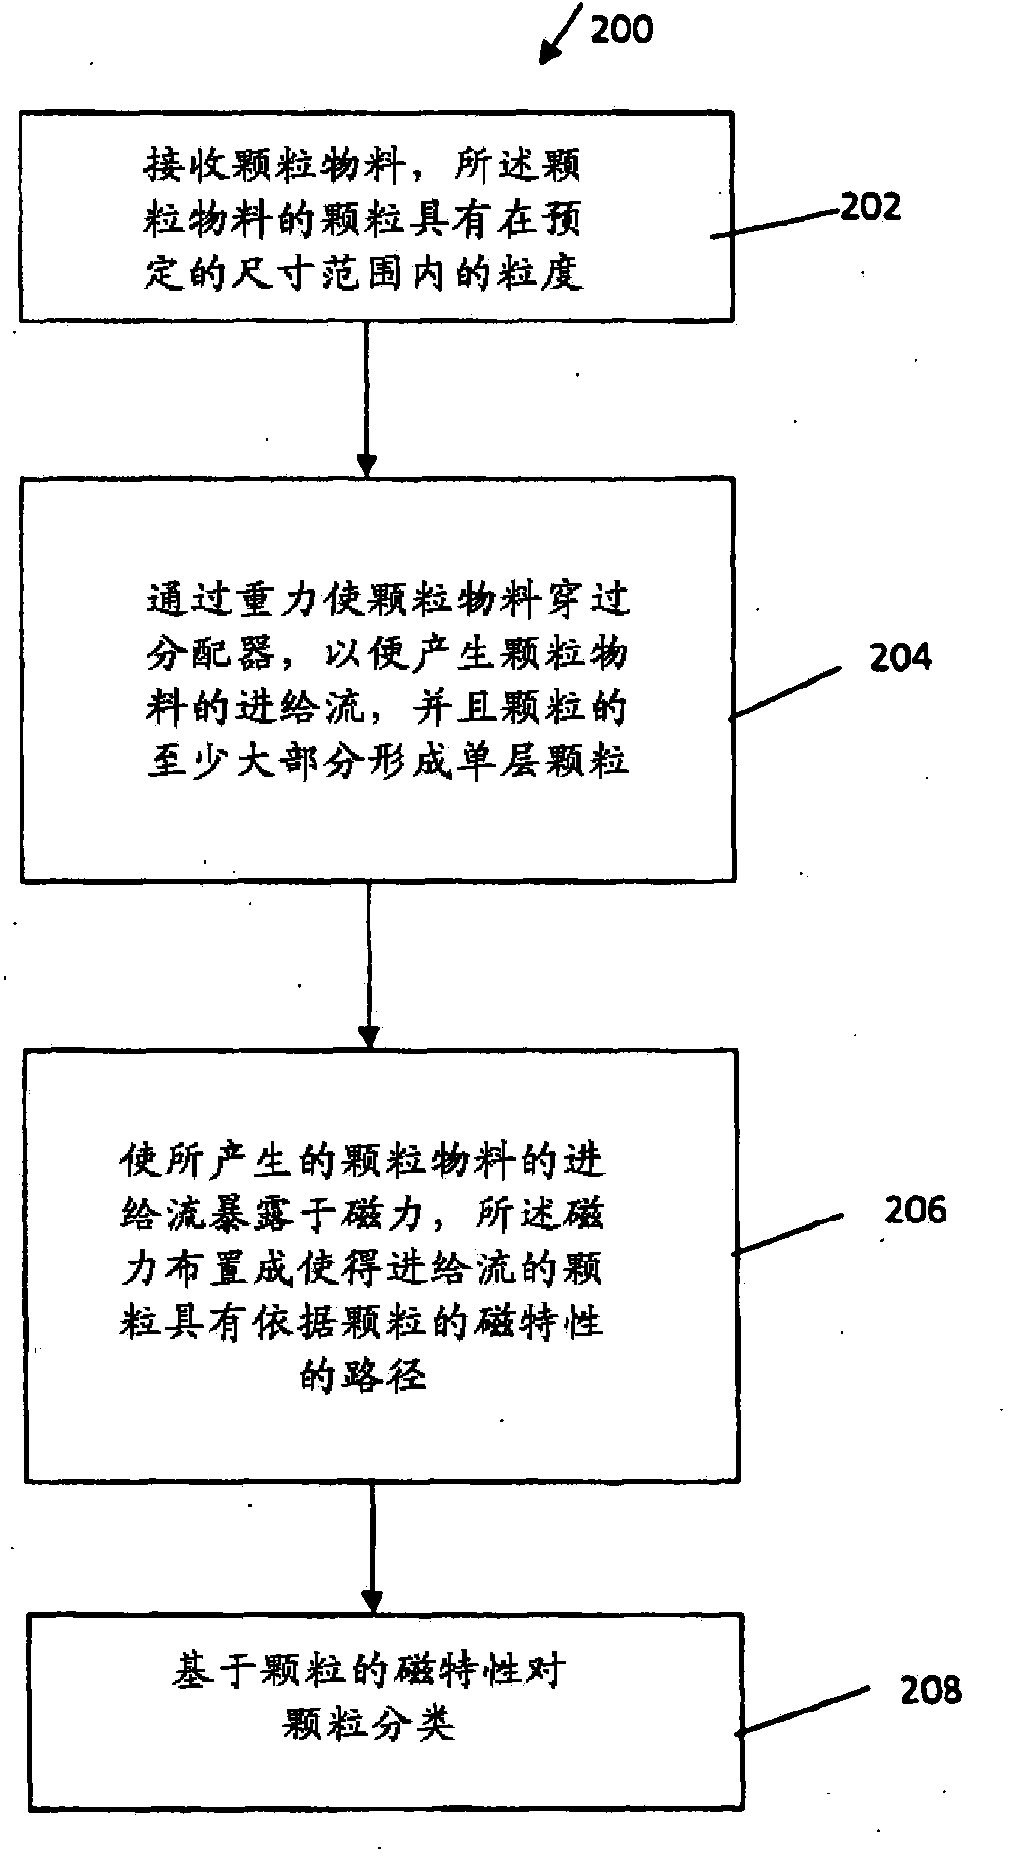 An apparatus and a method for sorting a particulate material